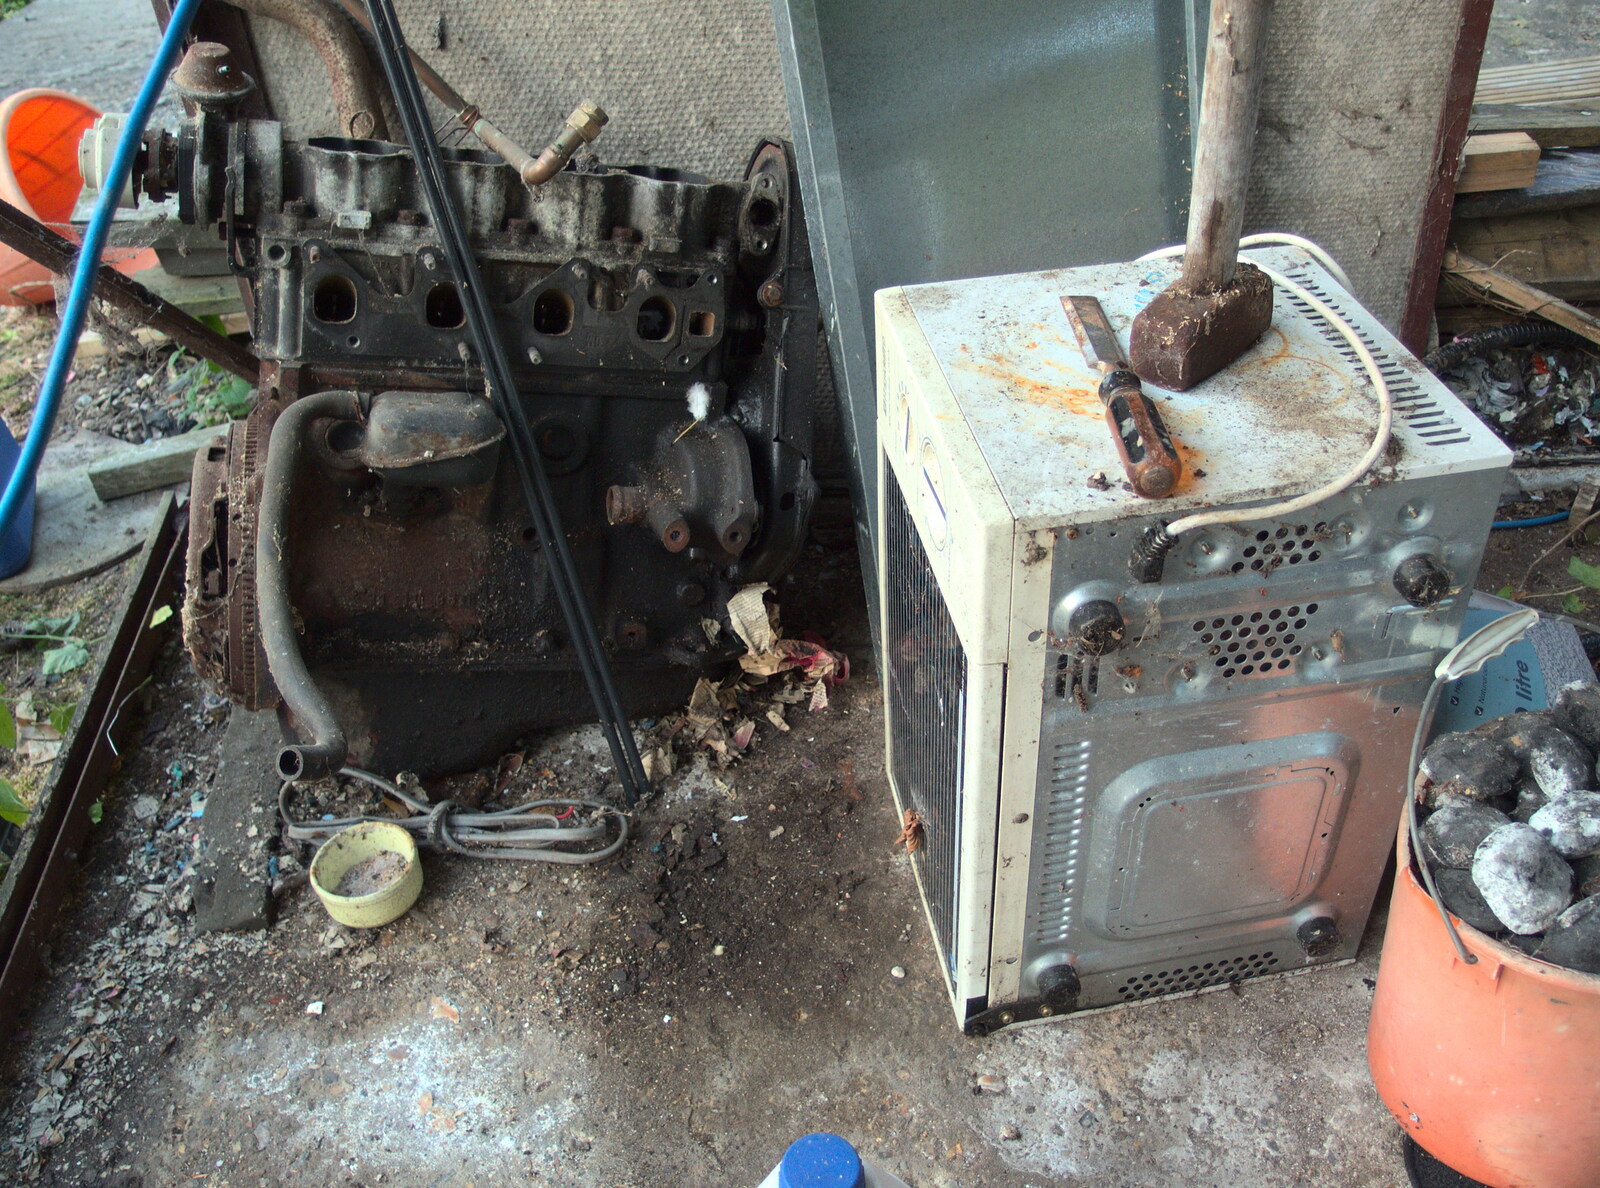 A Mk 1 Astra engine block, and a microwave from The Demolition of the Garage, Brome, Suffolk - 17th July 2013